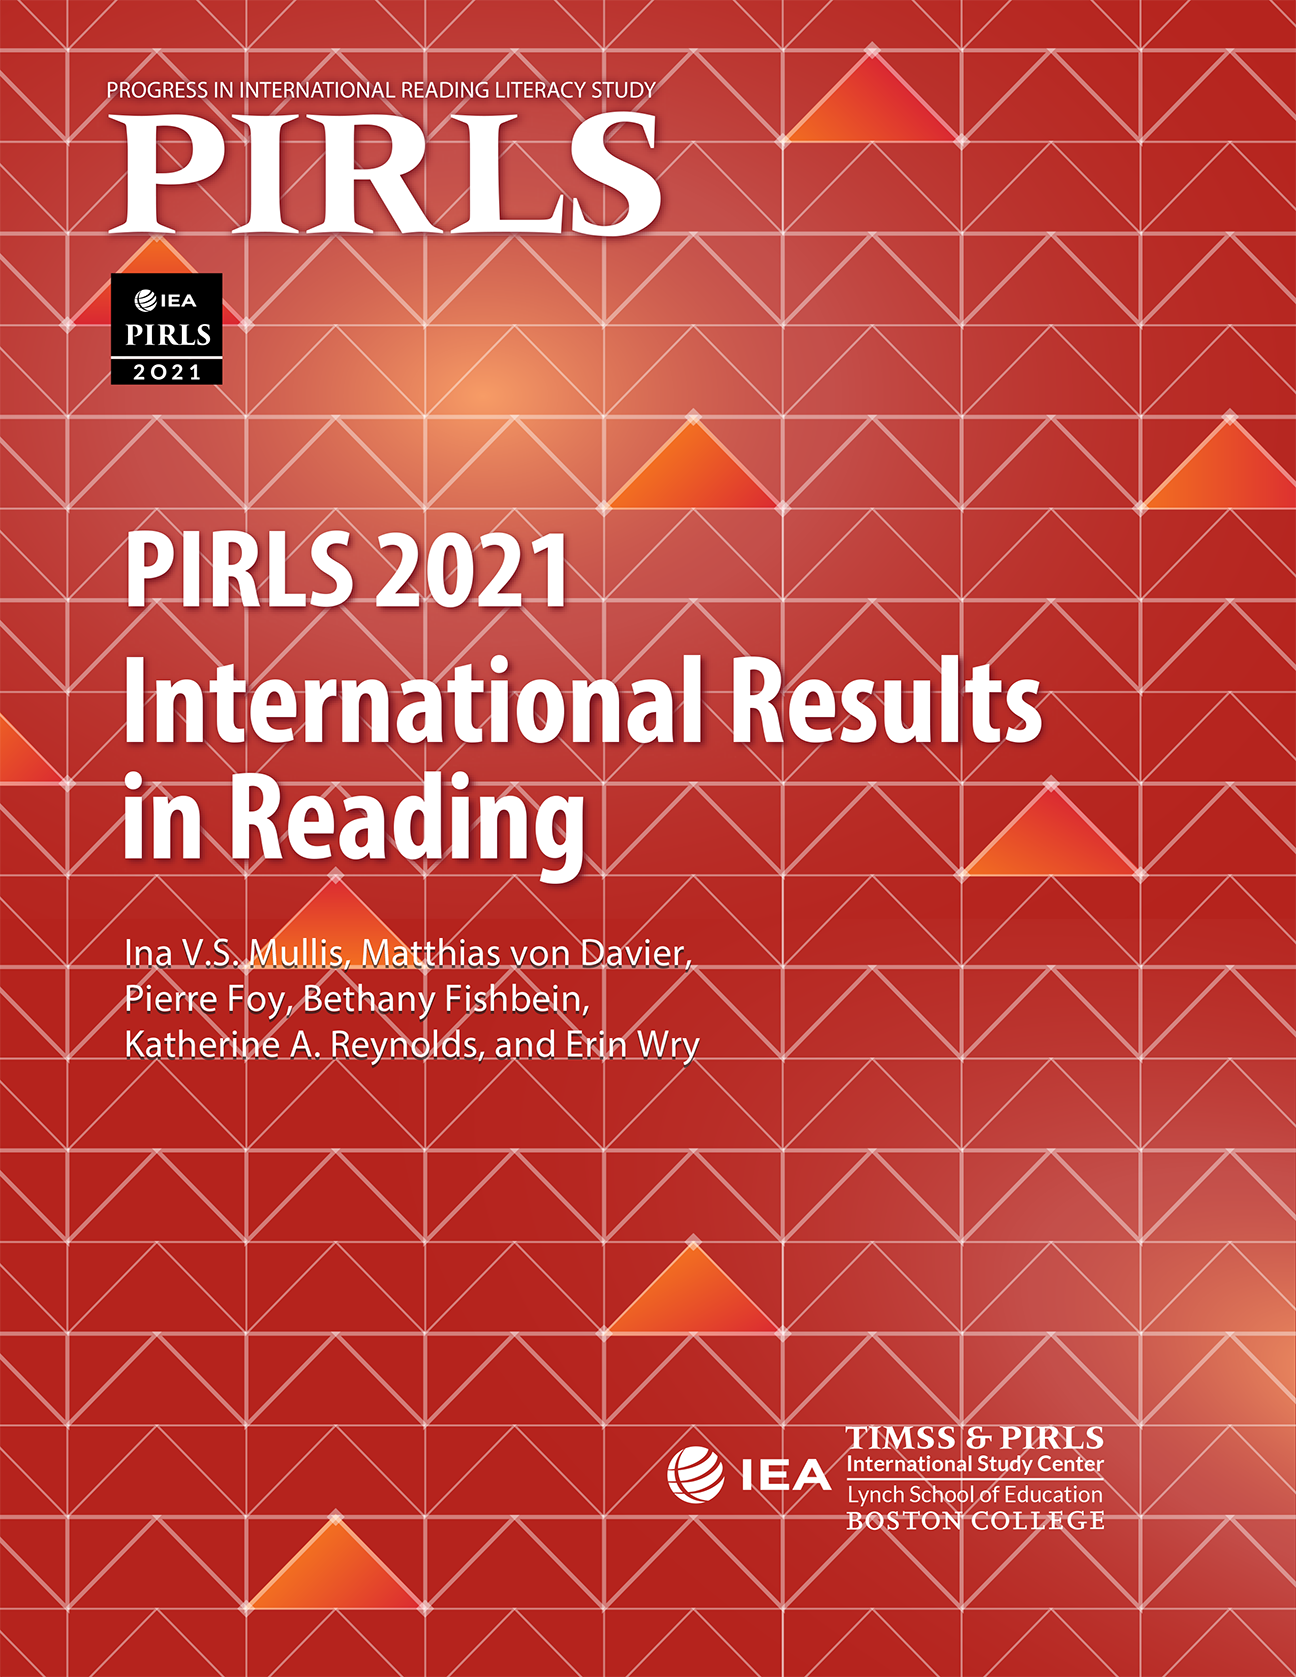 Cover art for the PIRLS 2021 International Results in Reading.